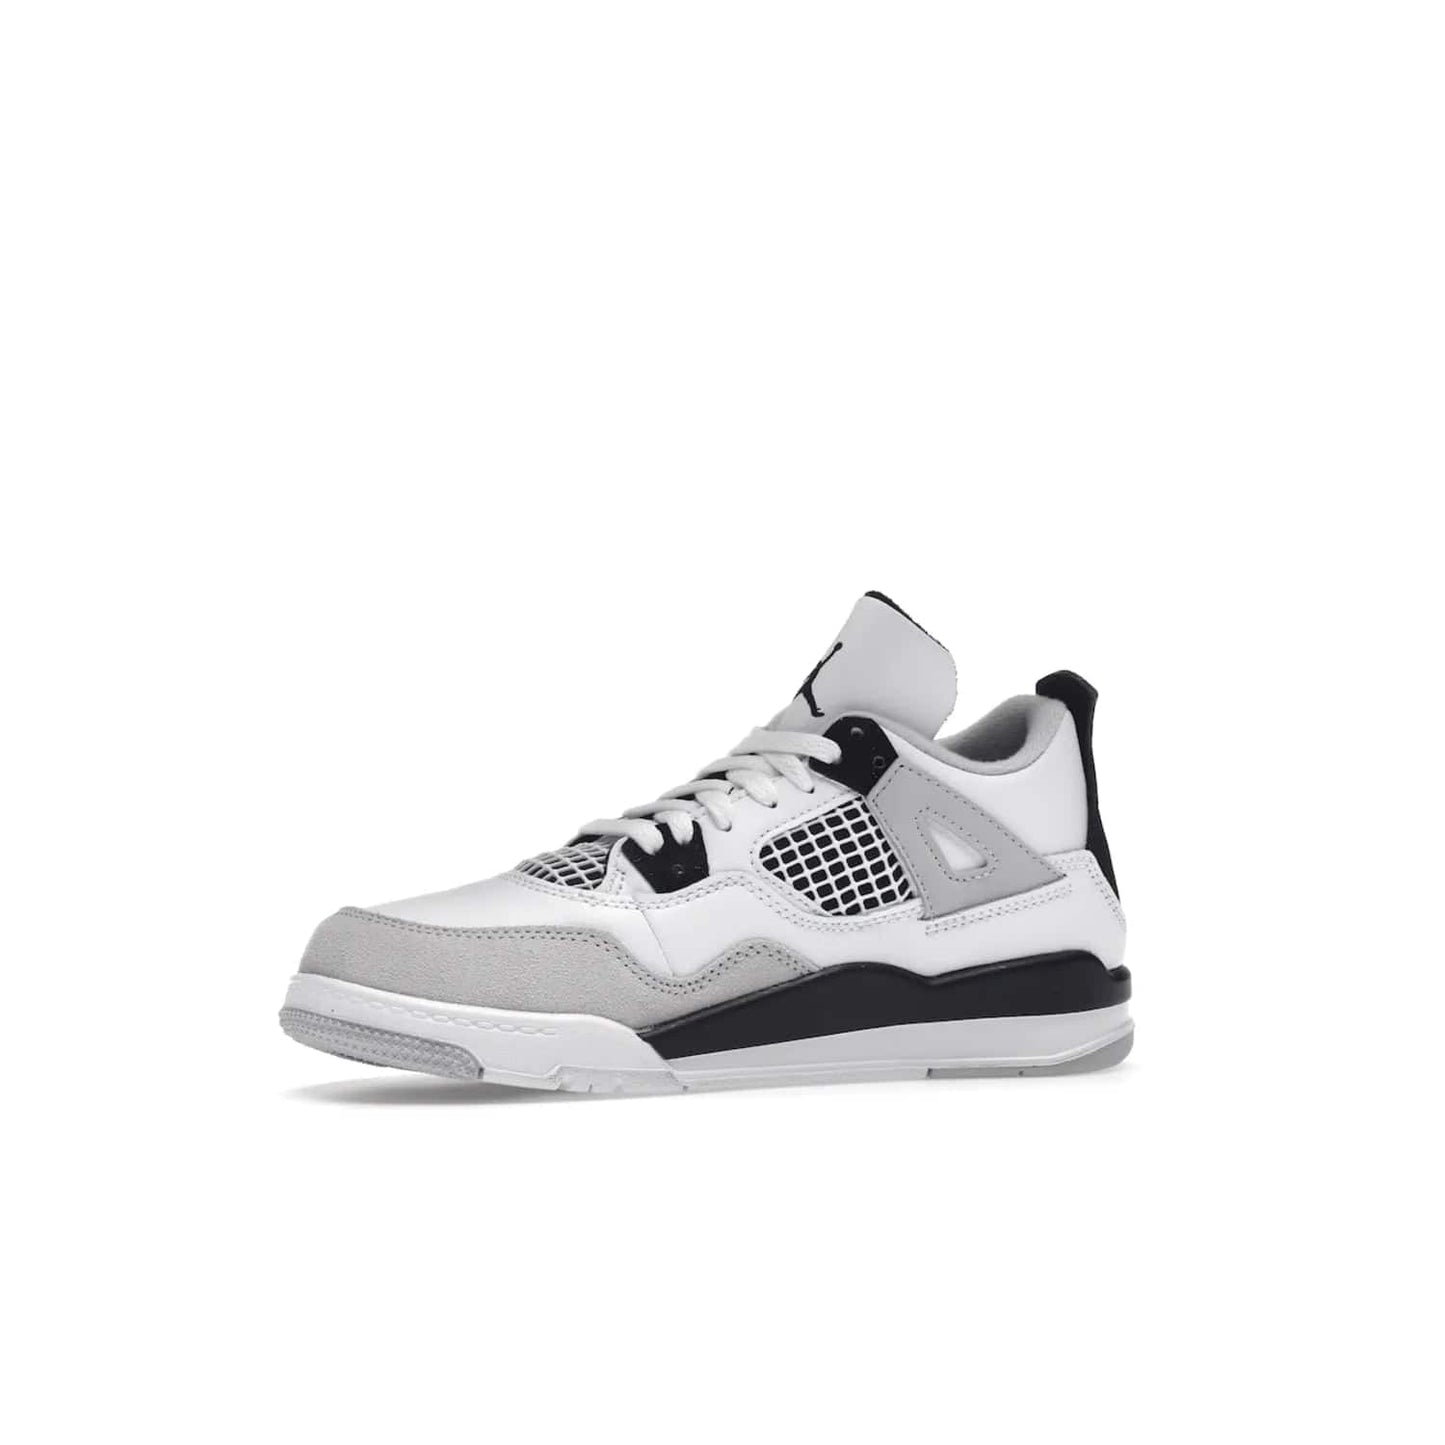 Jordan 4 Retro Military Black (PS) - Image 17 - Only at www.BallersClubKickz.com - Iconic Air Jordan 4 Retro Military Black PS with classic White, Black and Neutral Grey color palette. Mesh panels, adjustable lacing and rubber outsole. Releasing on 21st May 2022 - must-have for any sneaker collection.